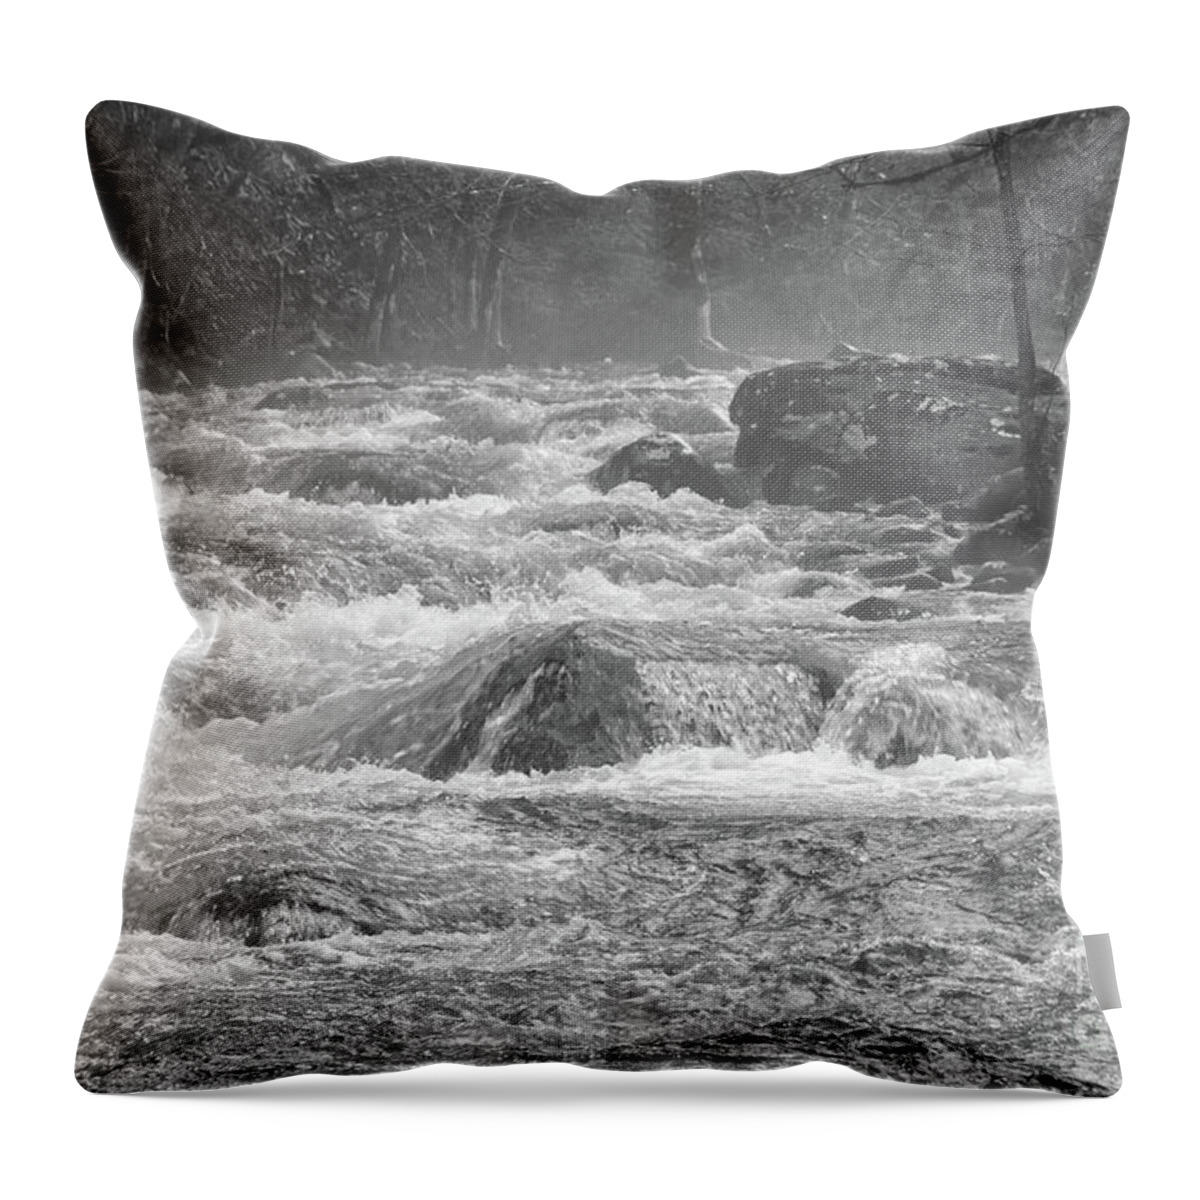 Tennessee Throw Pillow featuring the photograph Fog On River 2 by Phil Perkins